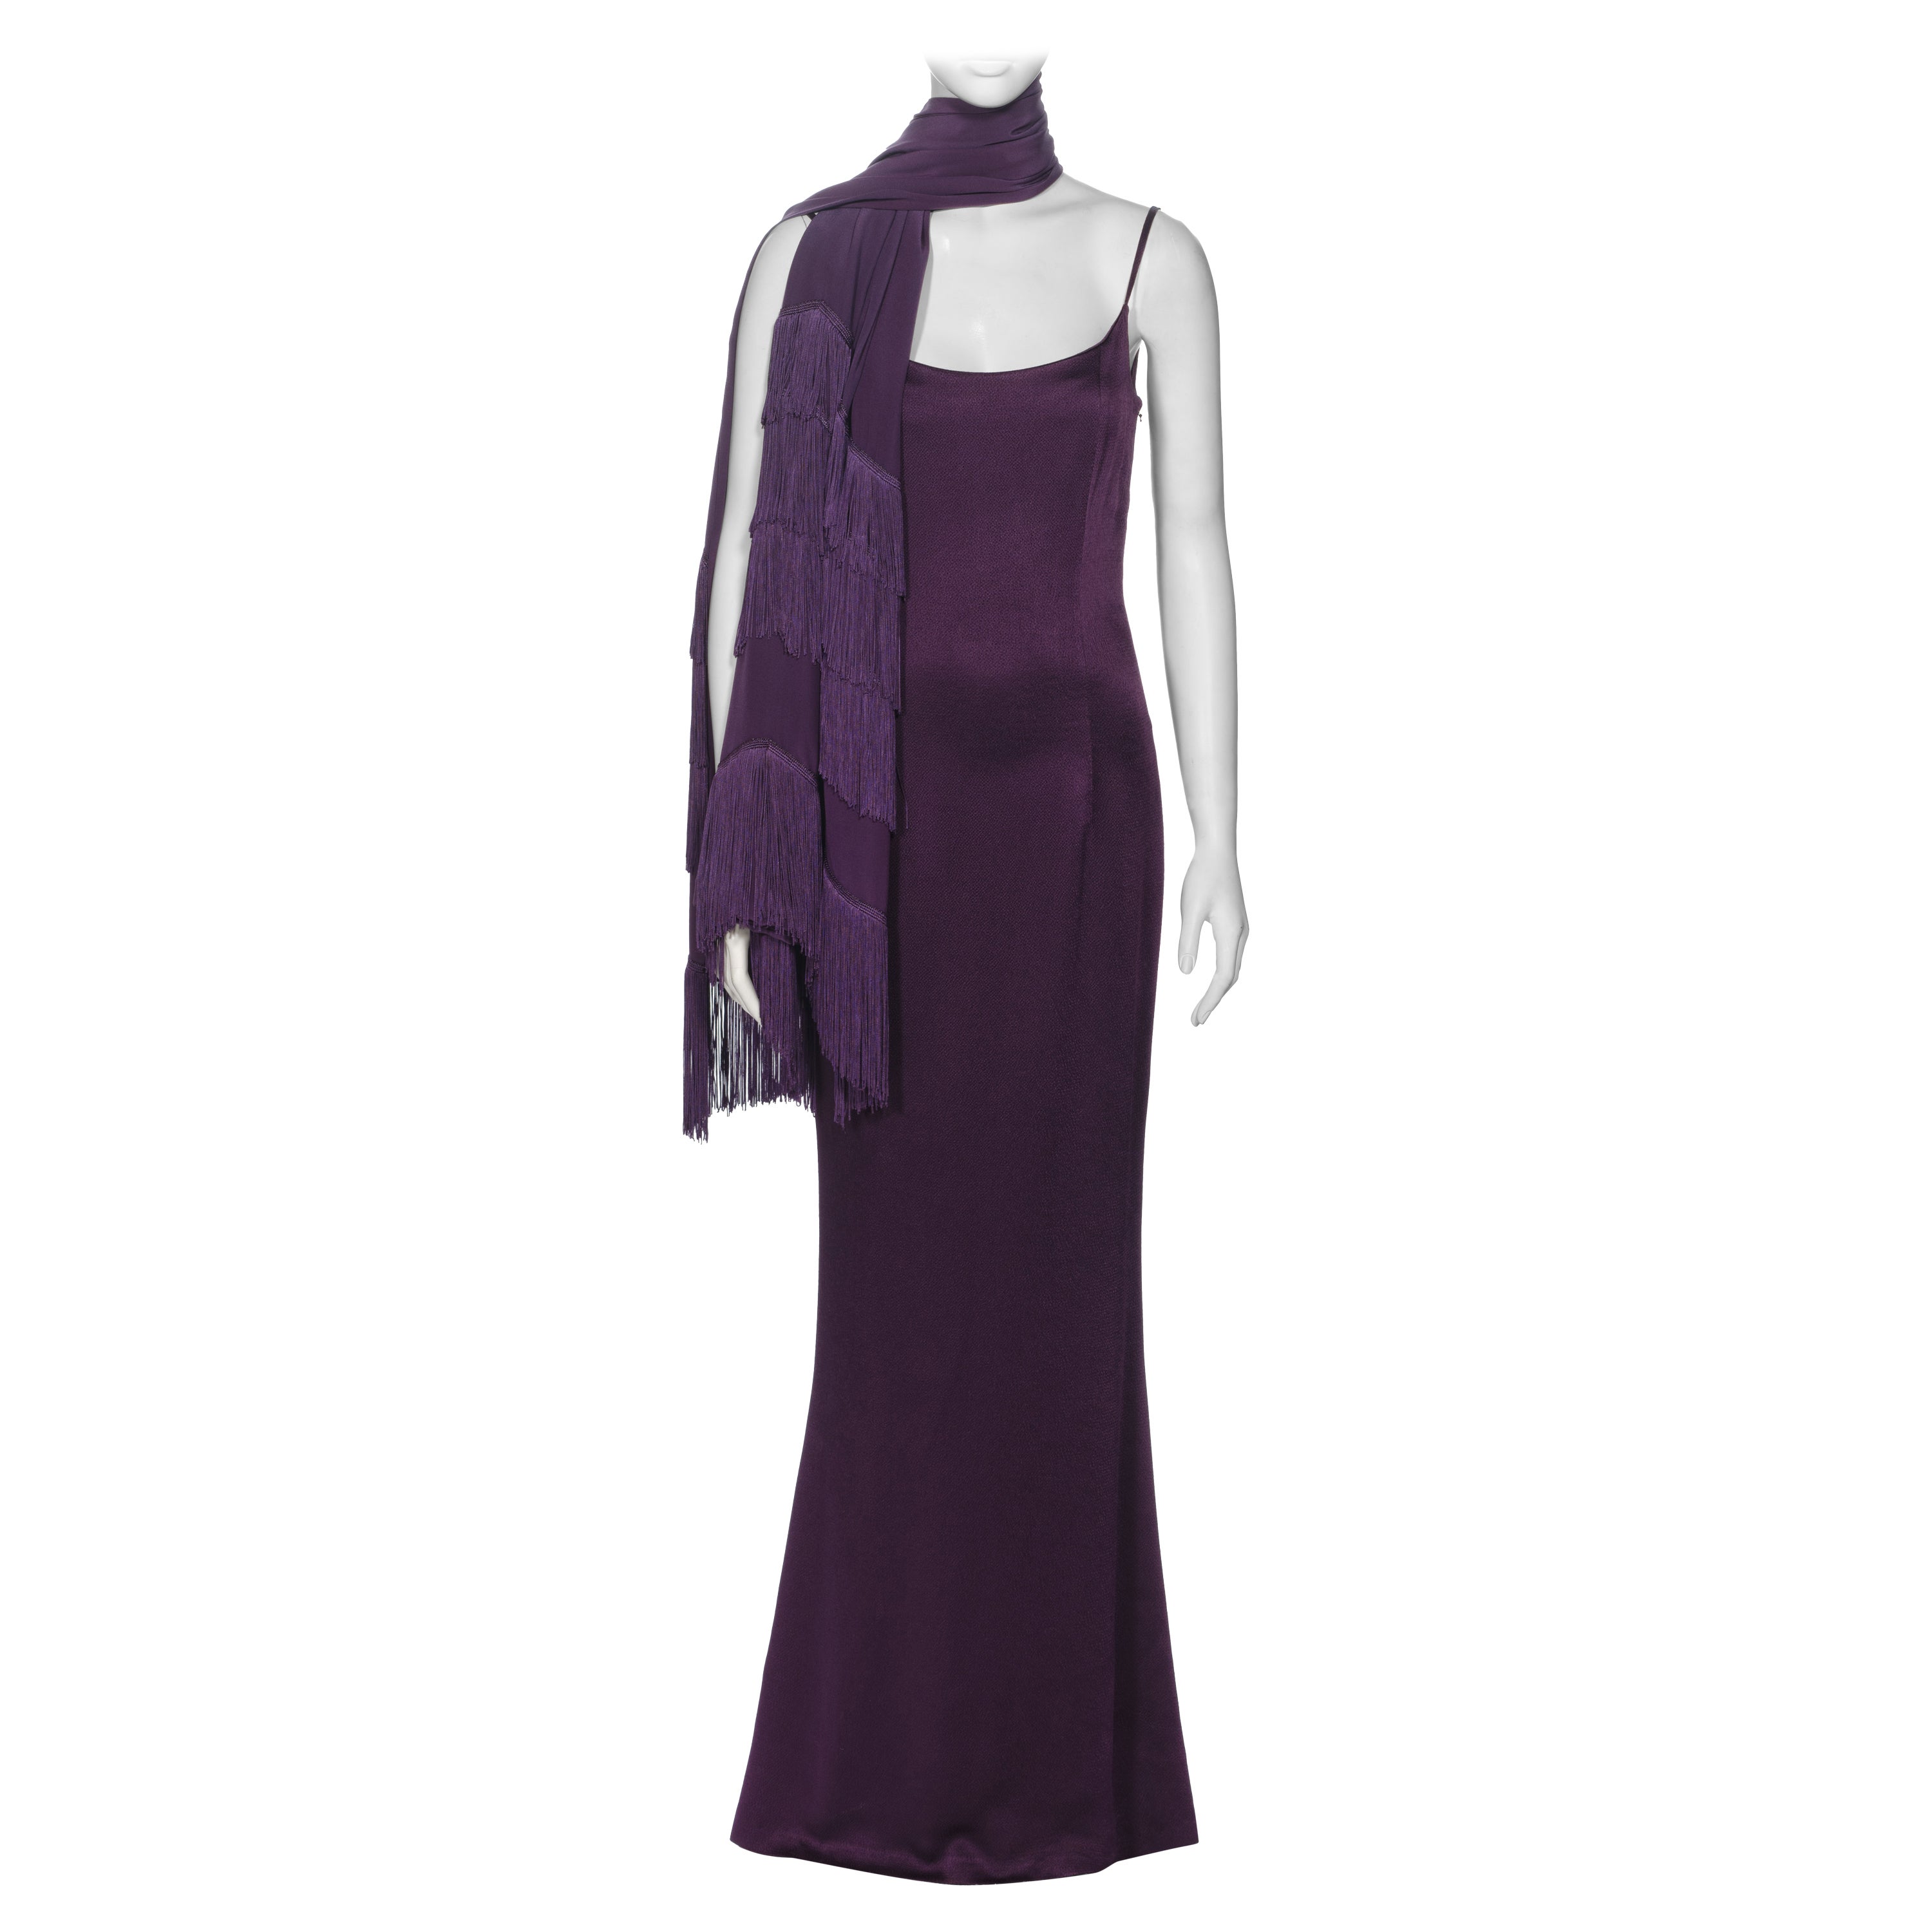 Christian Dior by John Galliano Purple Satin Evening Dress and Shawl, ss 1998 For Sale